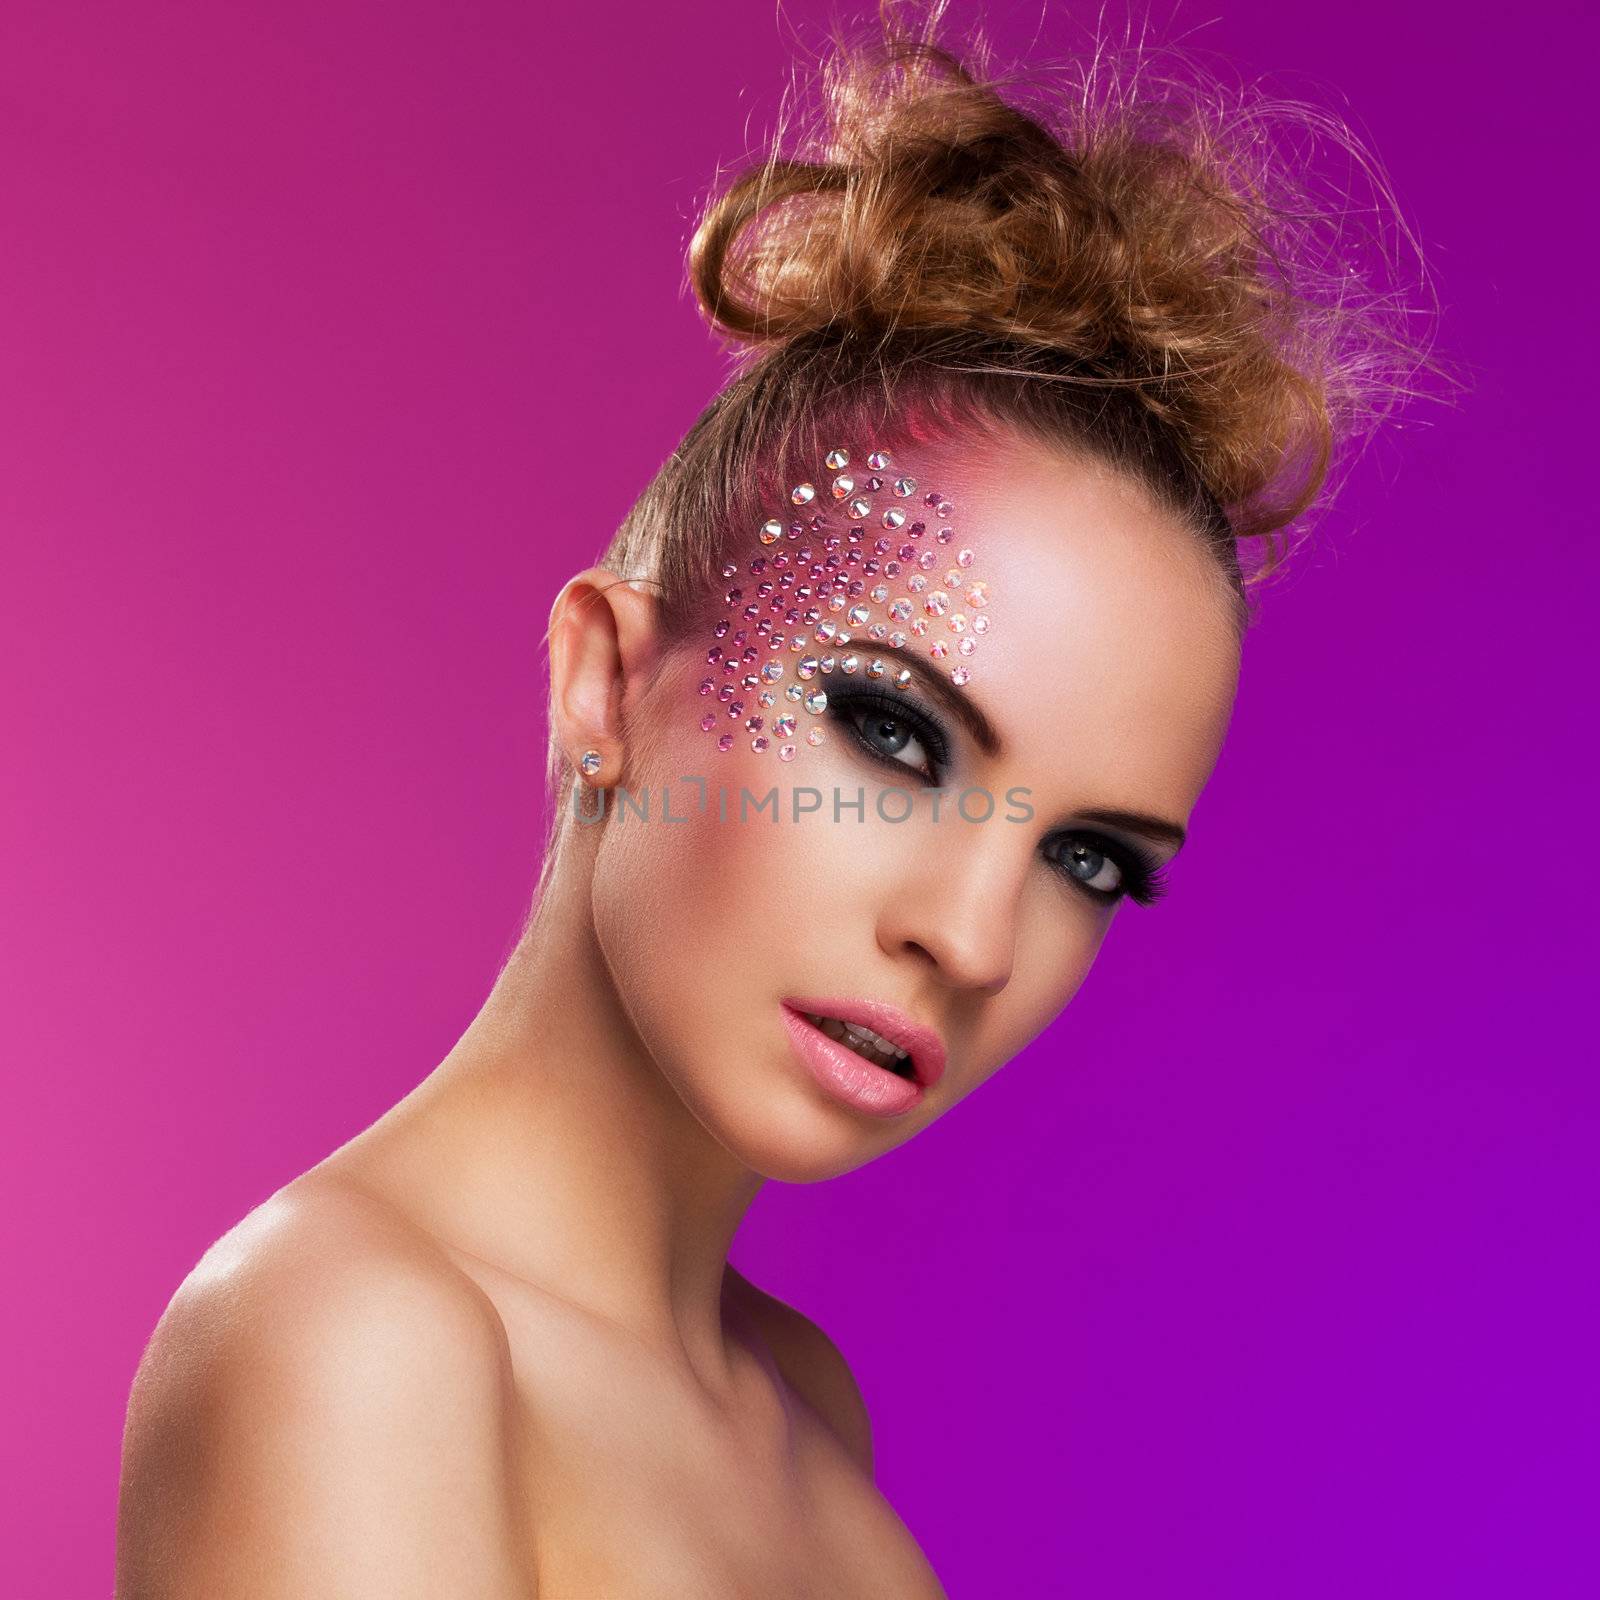 Beautiful woman with fantasy makeup on a violet background